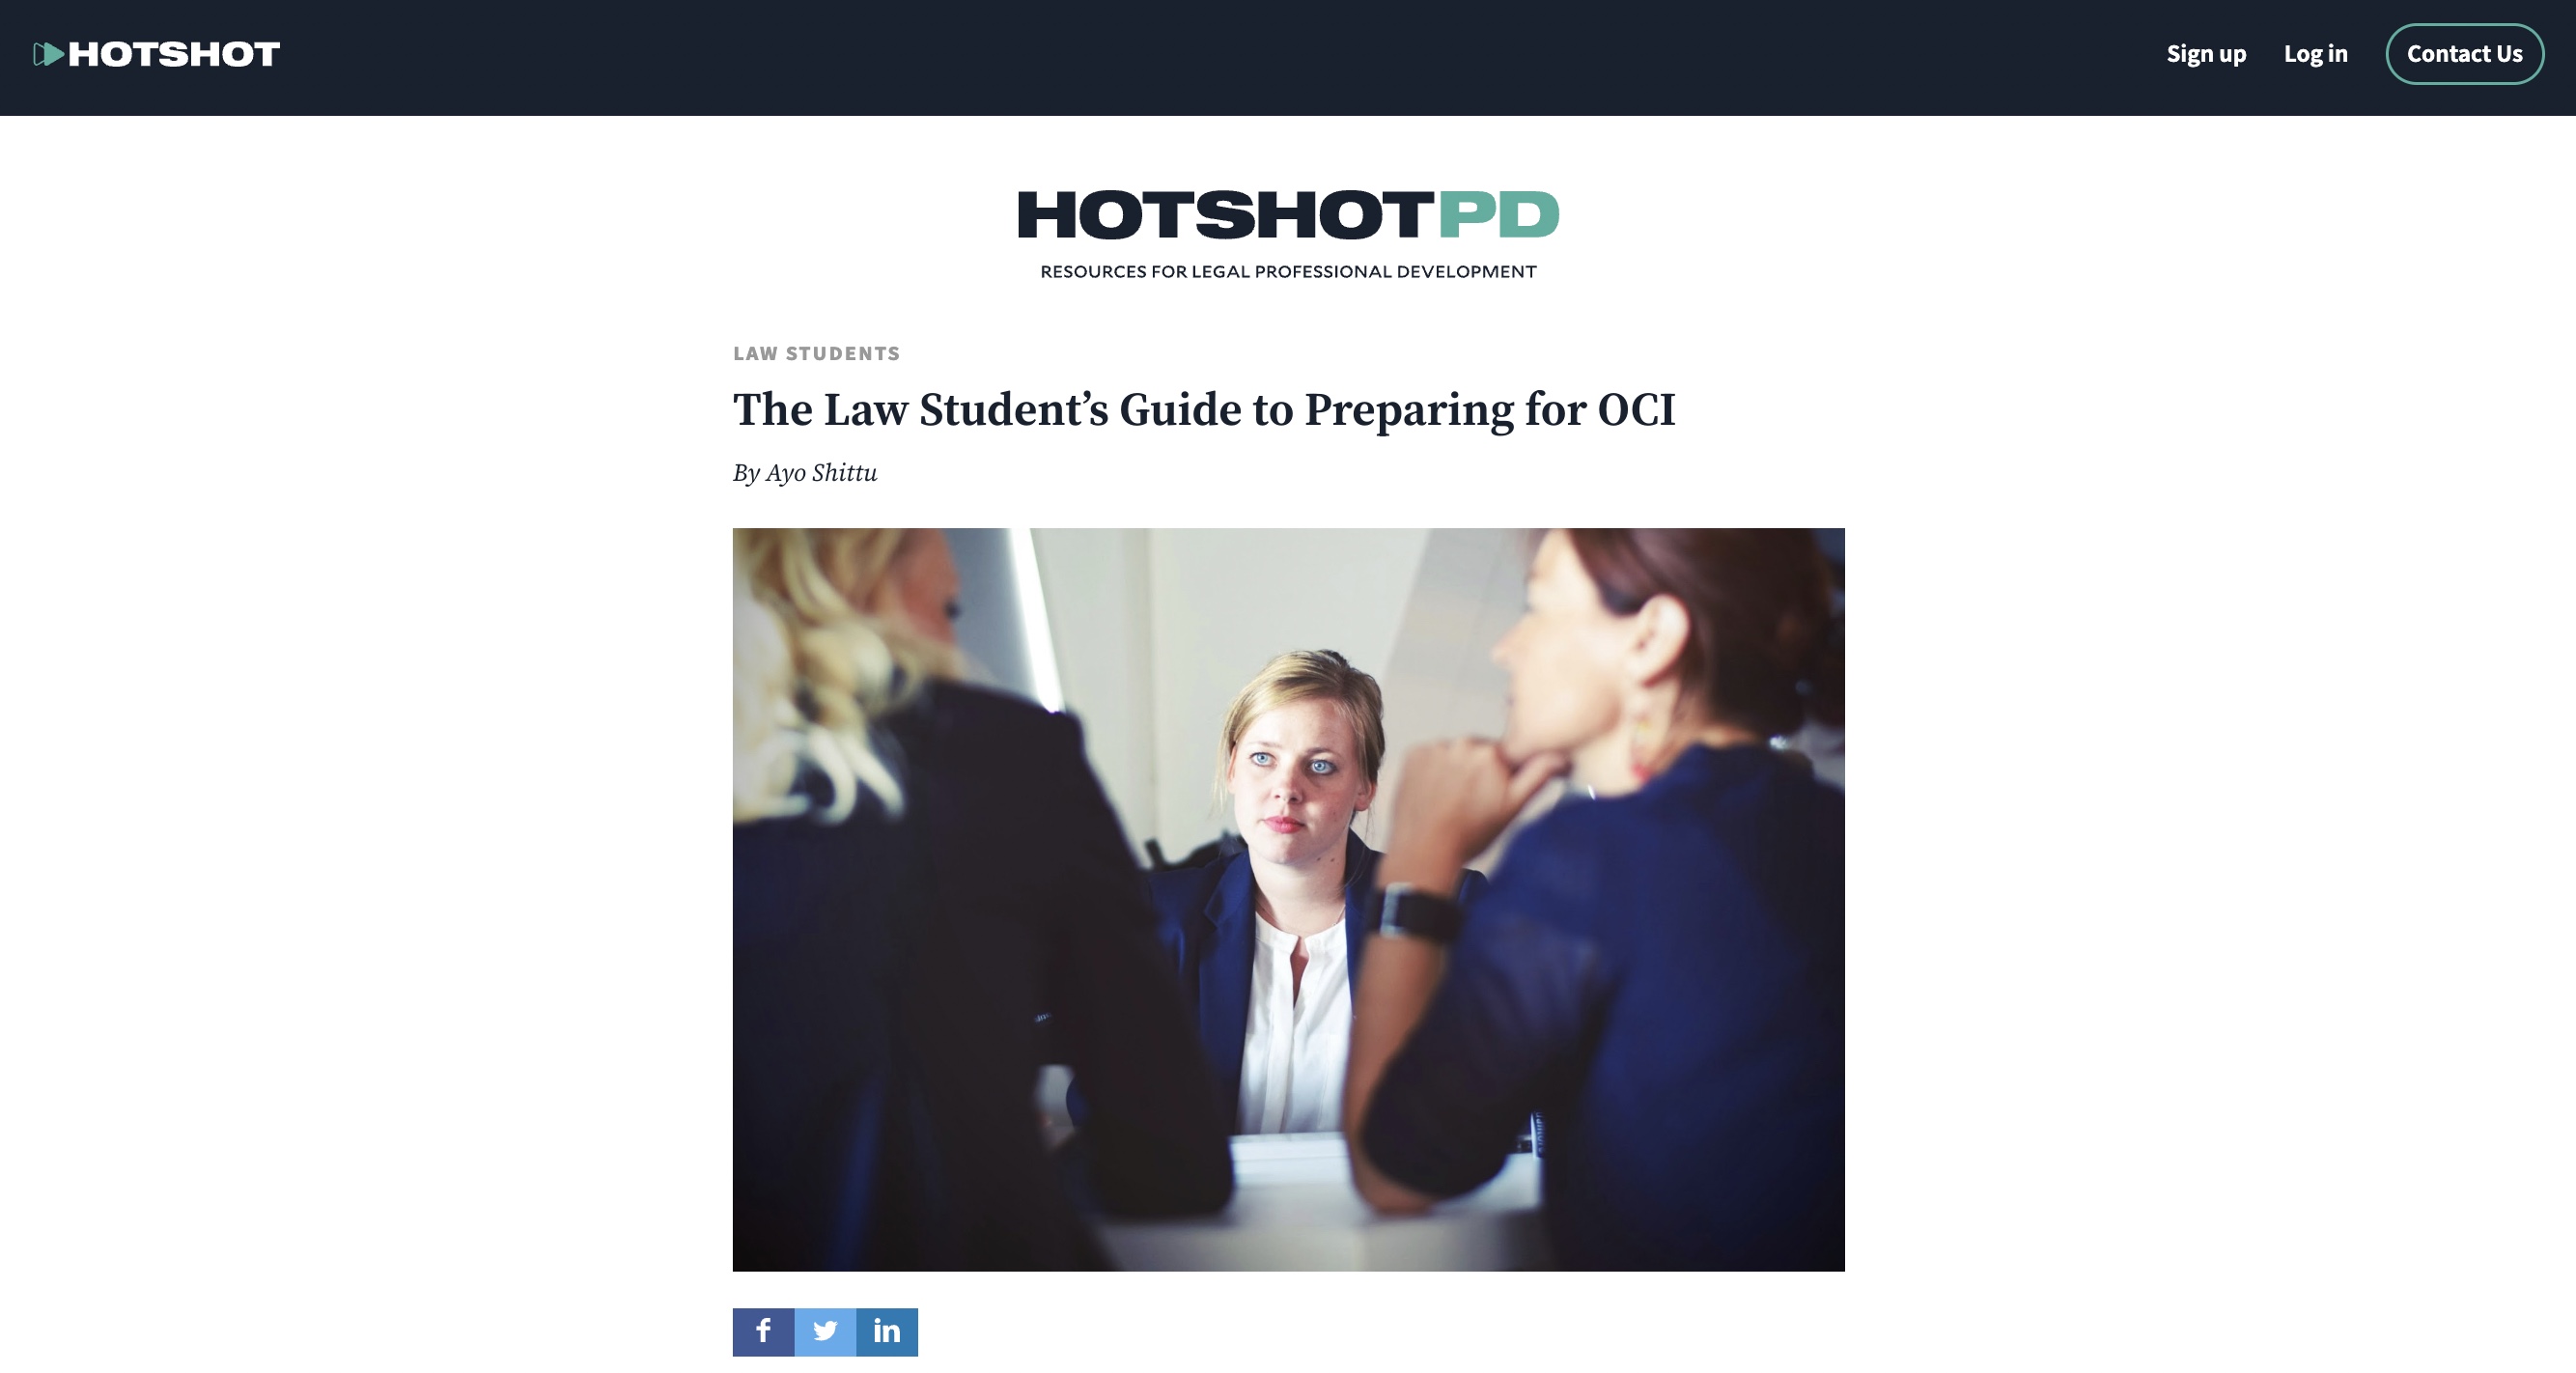 The Law Student's Guide to Preparing for OCI